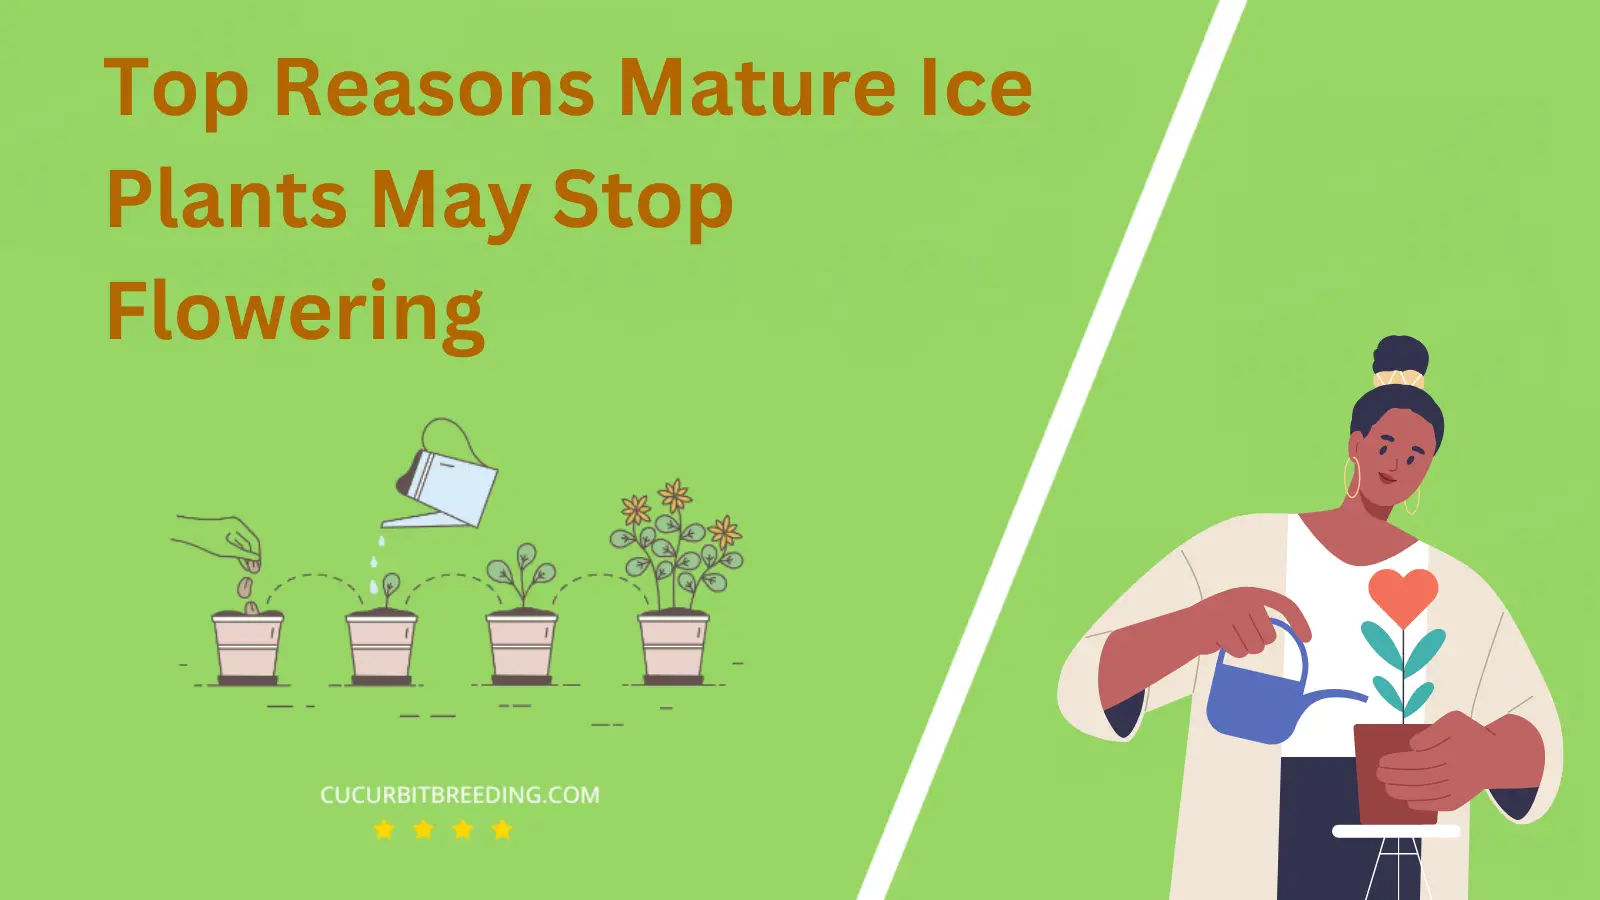 Top Reasons Mature Ice Plants May Stop Flowering